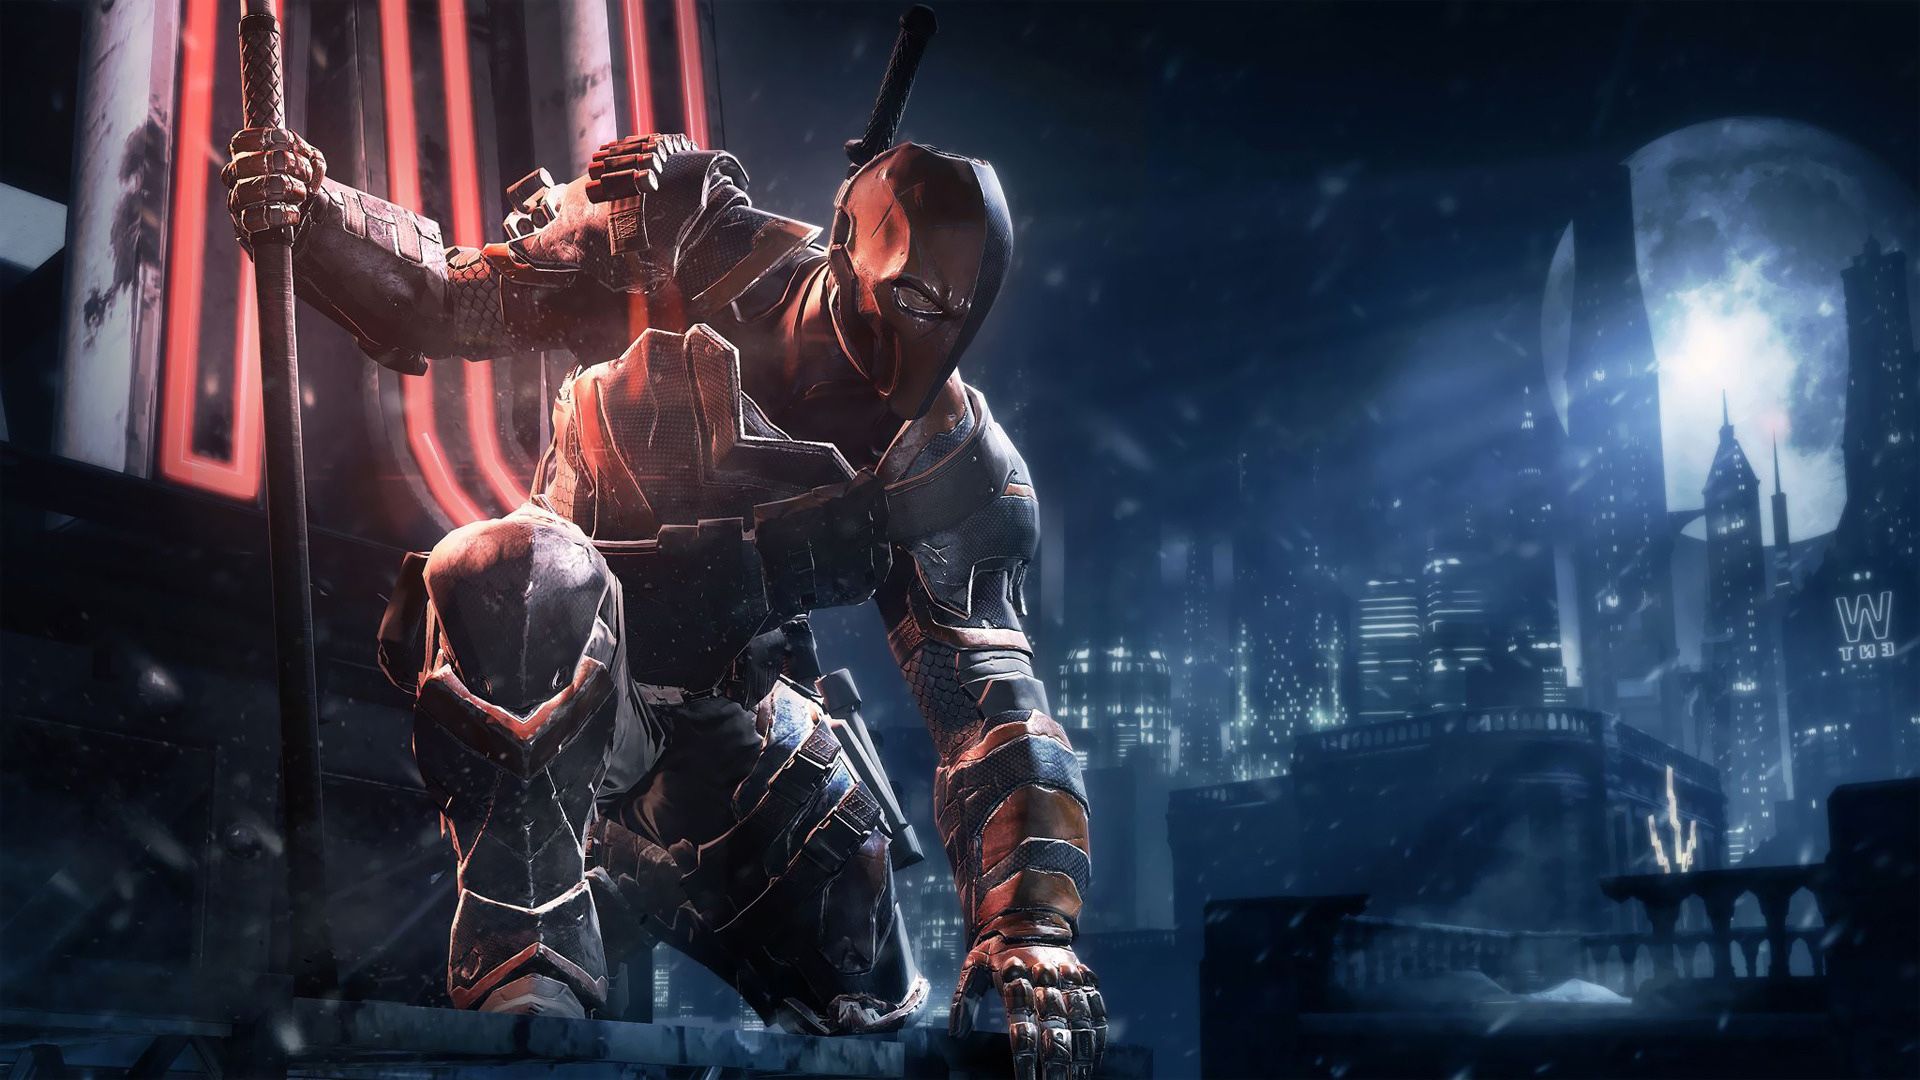 Deathstroke Batman Arkham Origins HD Games Wallpapers for Mobile and 1920x1080